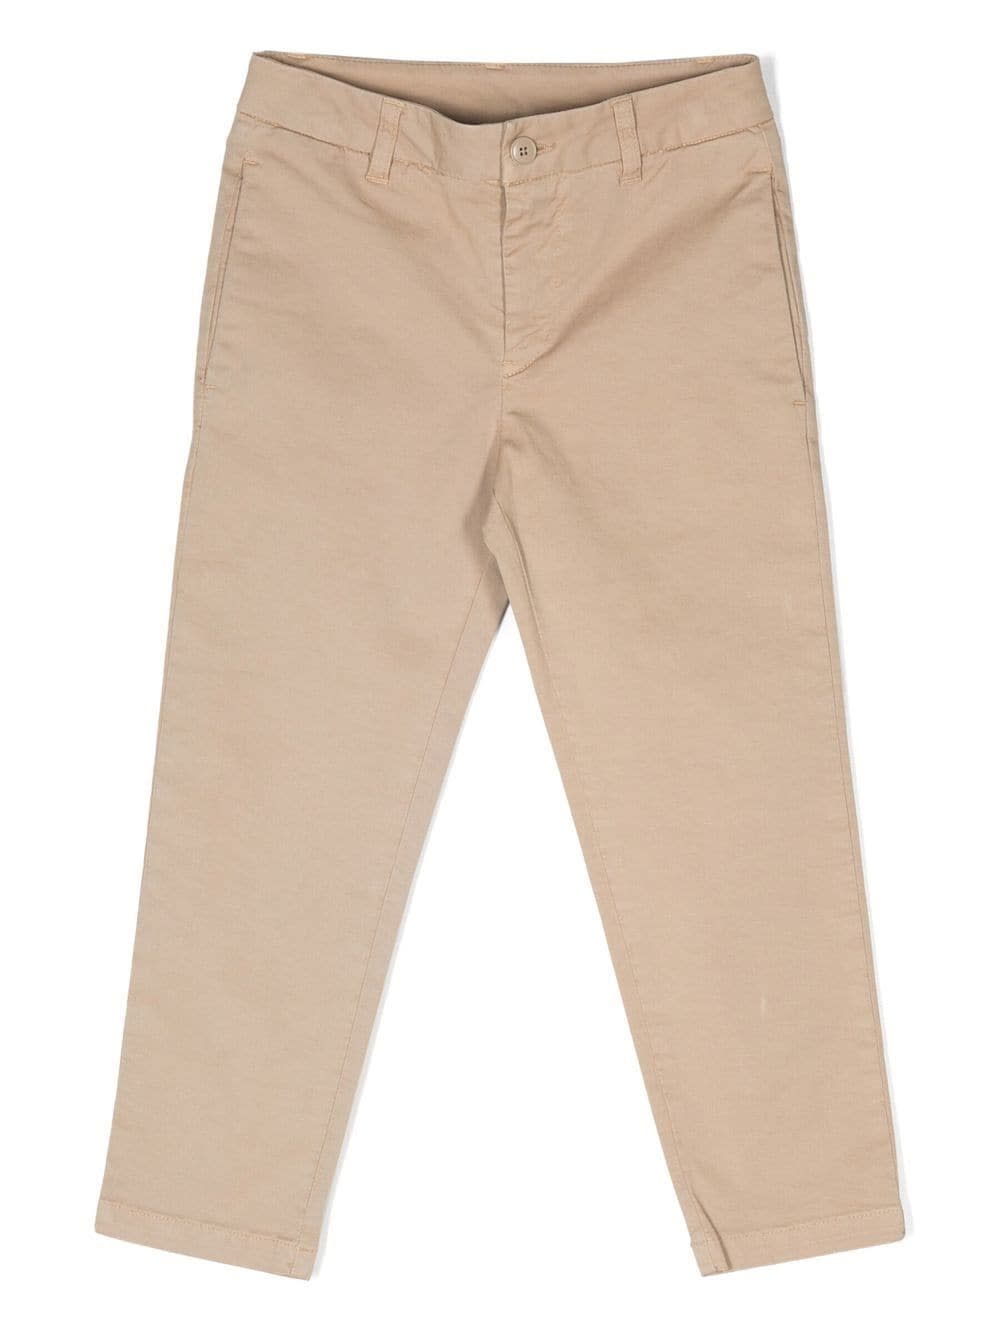 DONDUP BEIGE CHINO TROUSERS